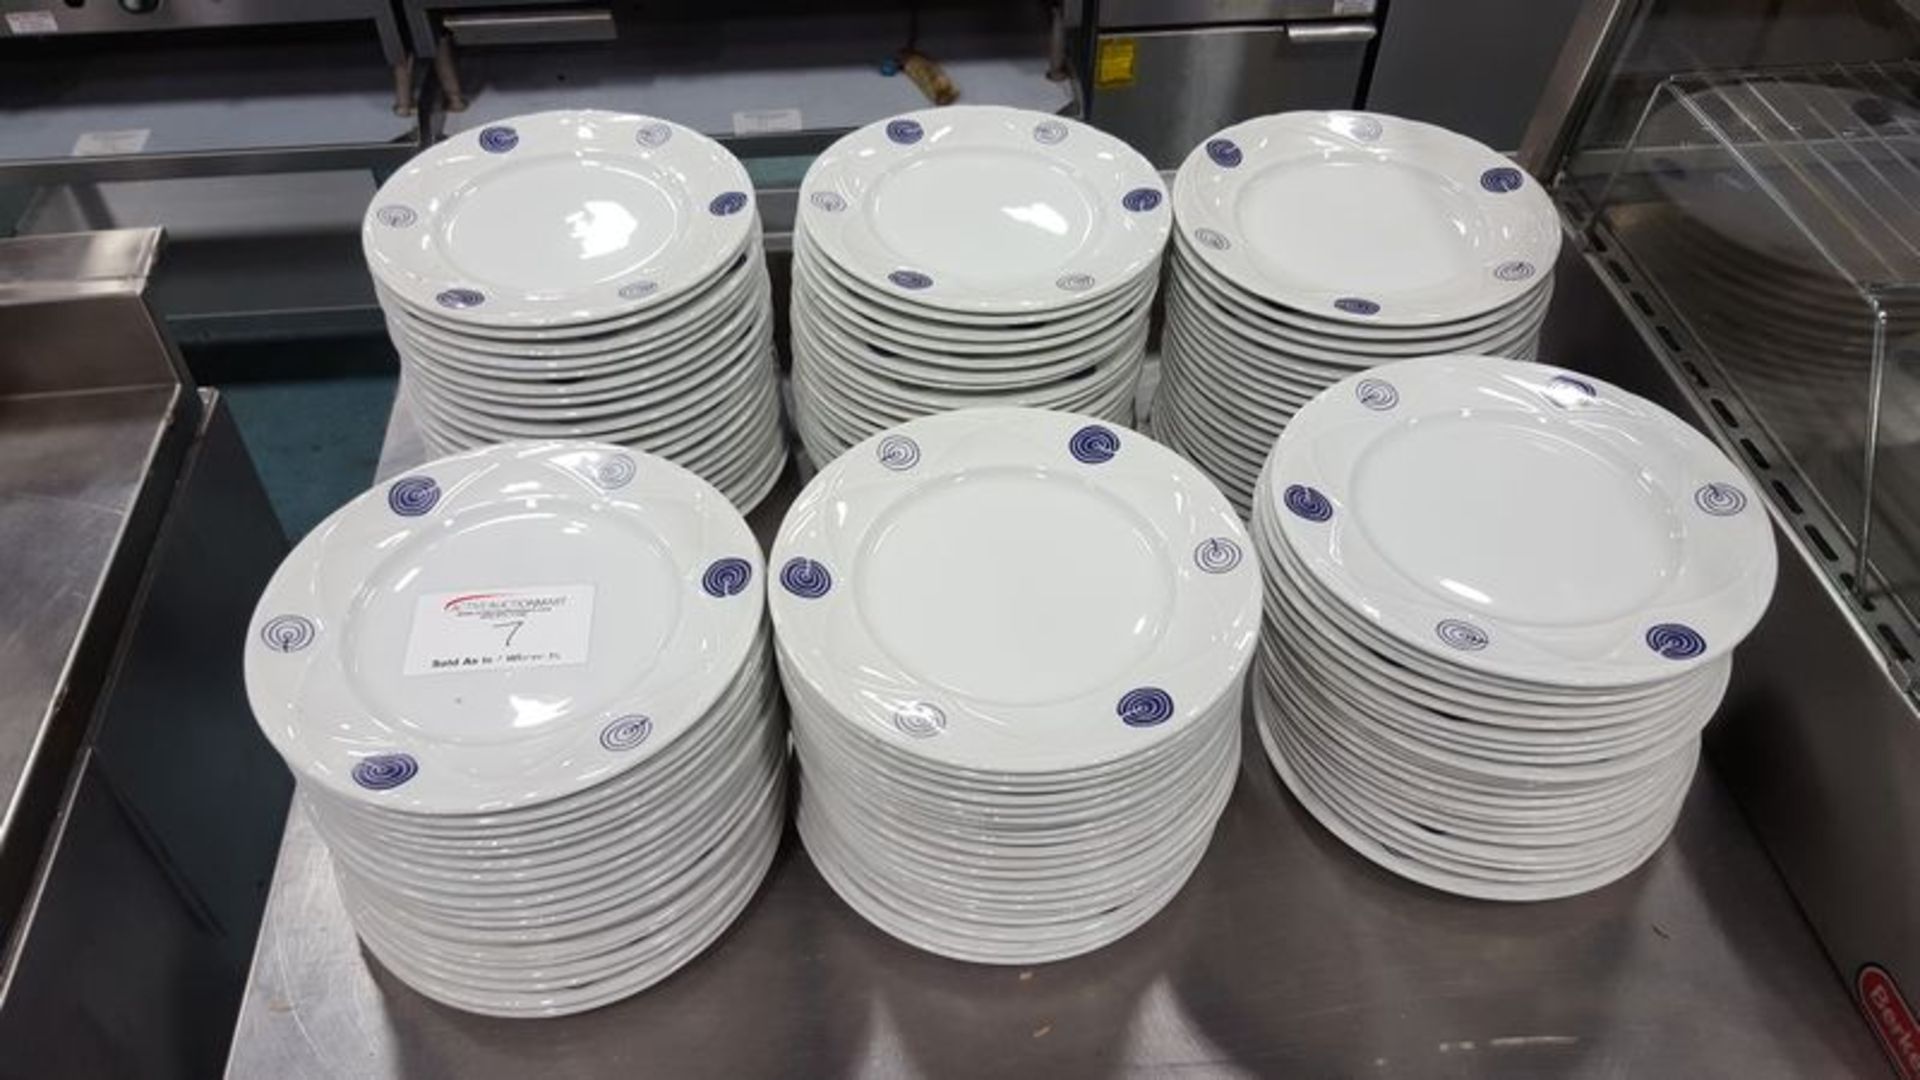 120 each - 10.5 inch new plates in original boxes